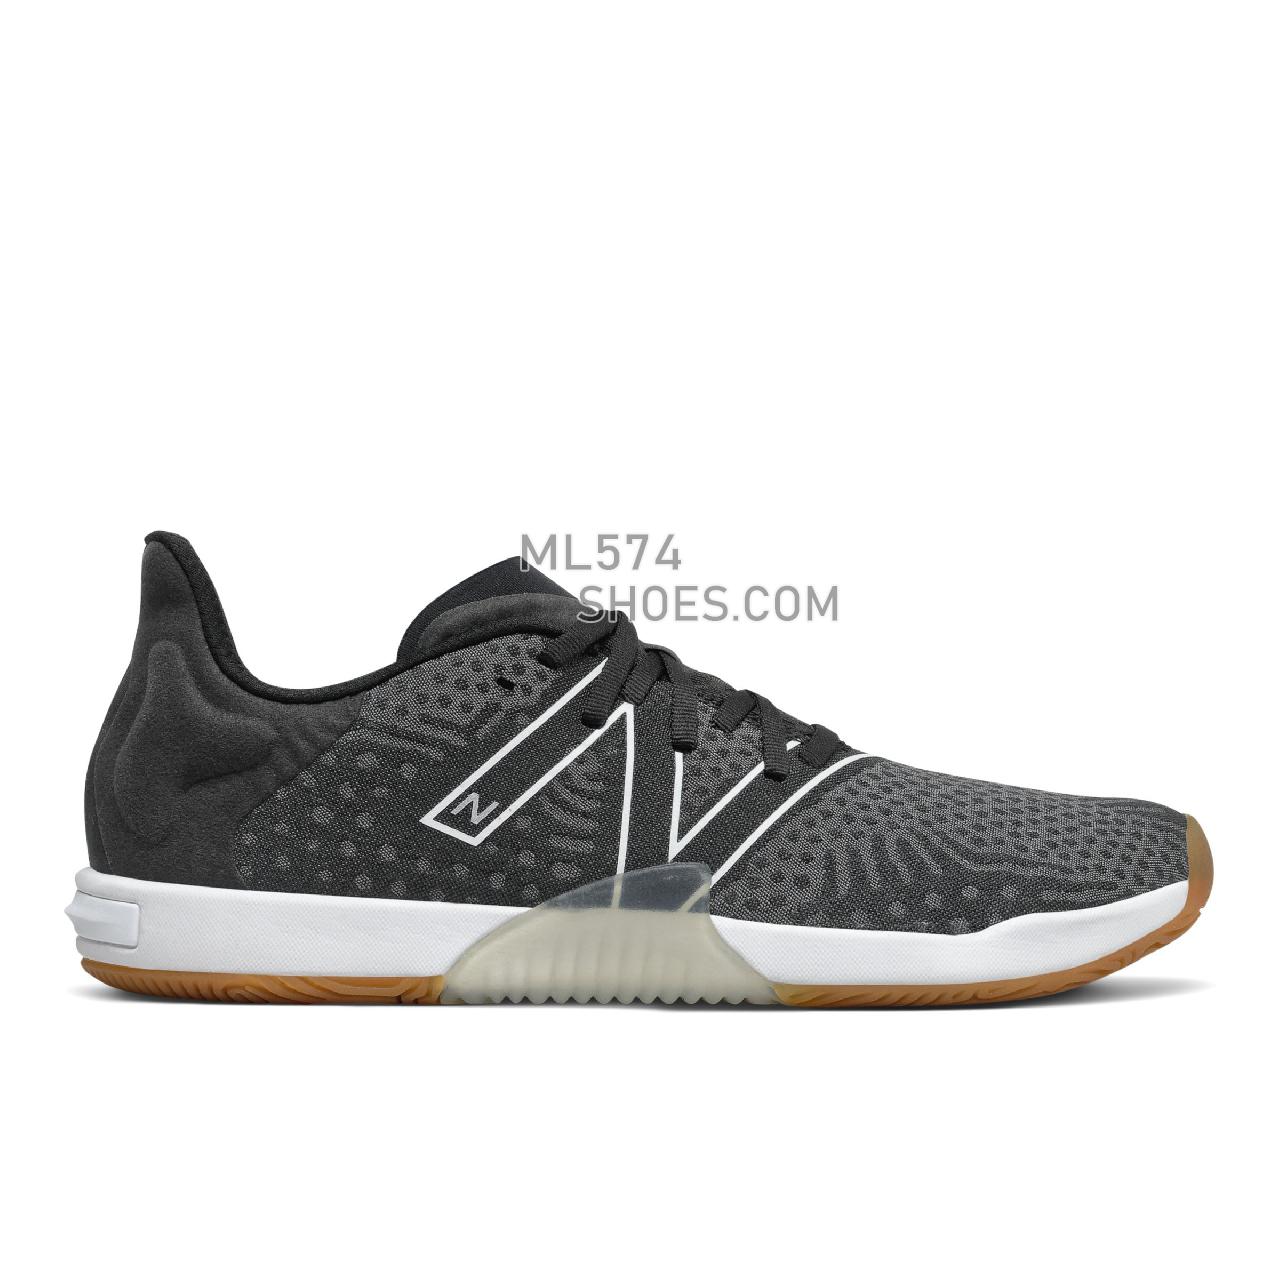 New Balance Minimus TR - Men's Cross-Training - Black with Outerspace and White - MXMTRLK1